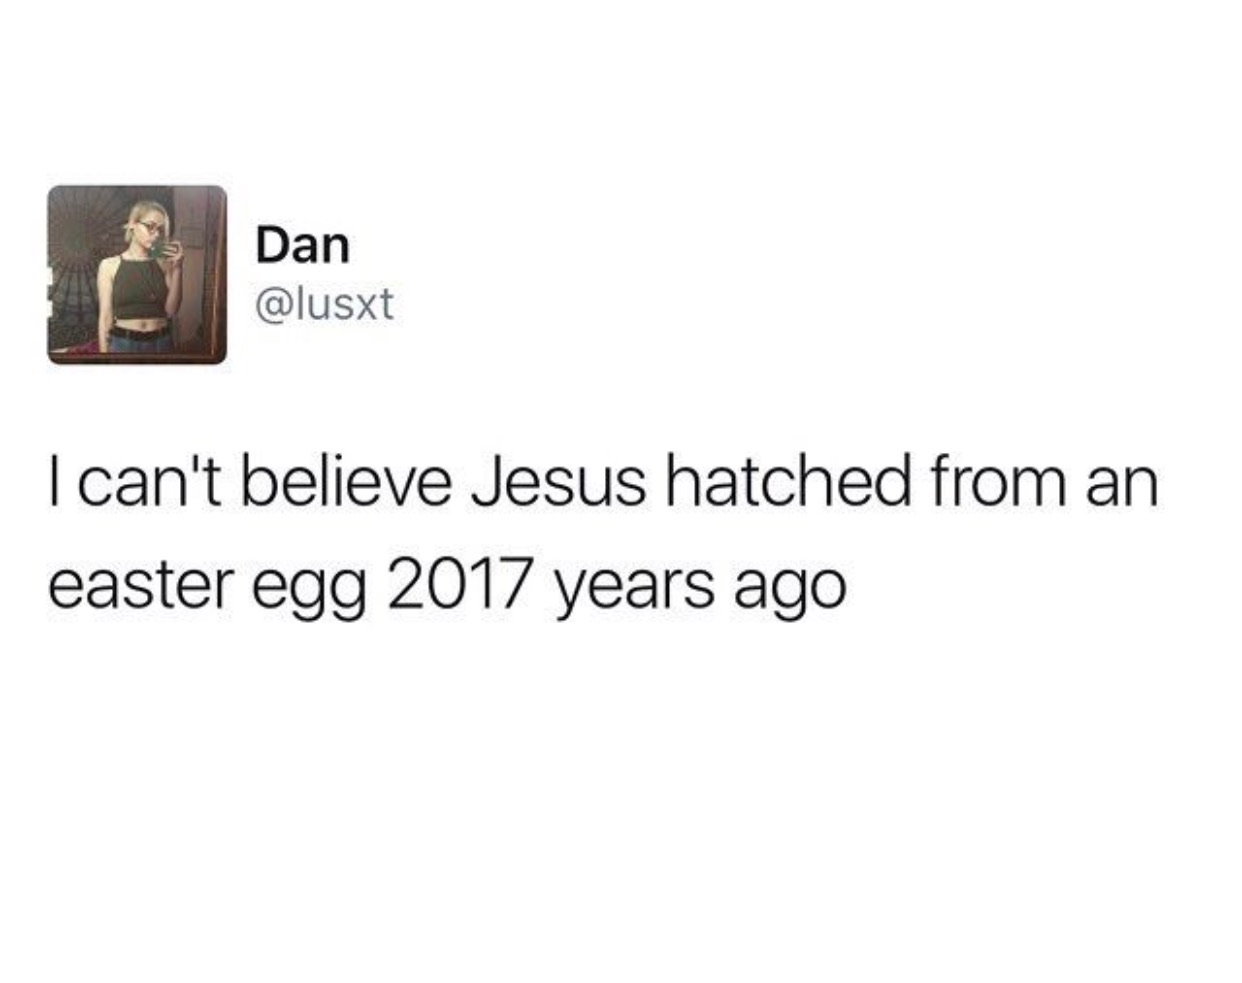 wolf pupy hit the hay - Dan I can't believe Jesus hatched from an easter egg 2017 years ago